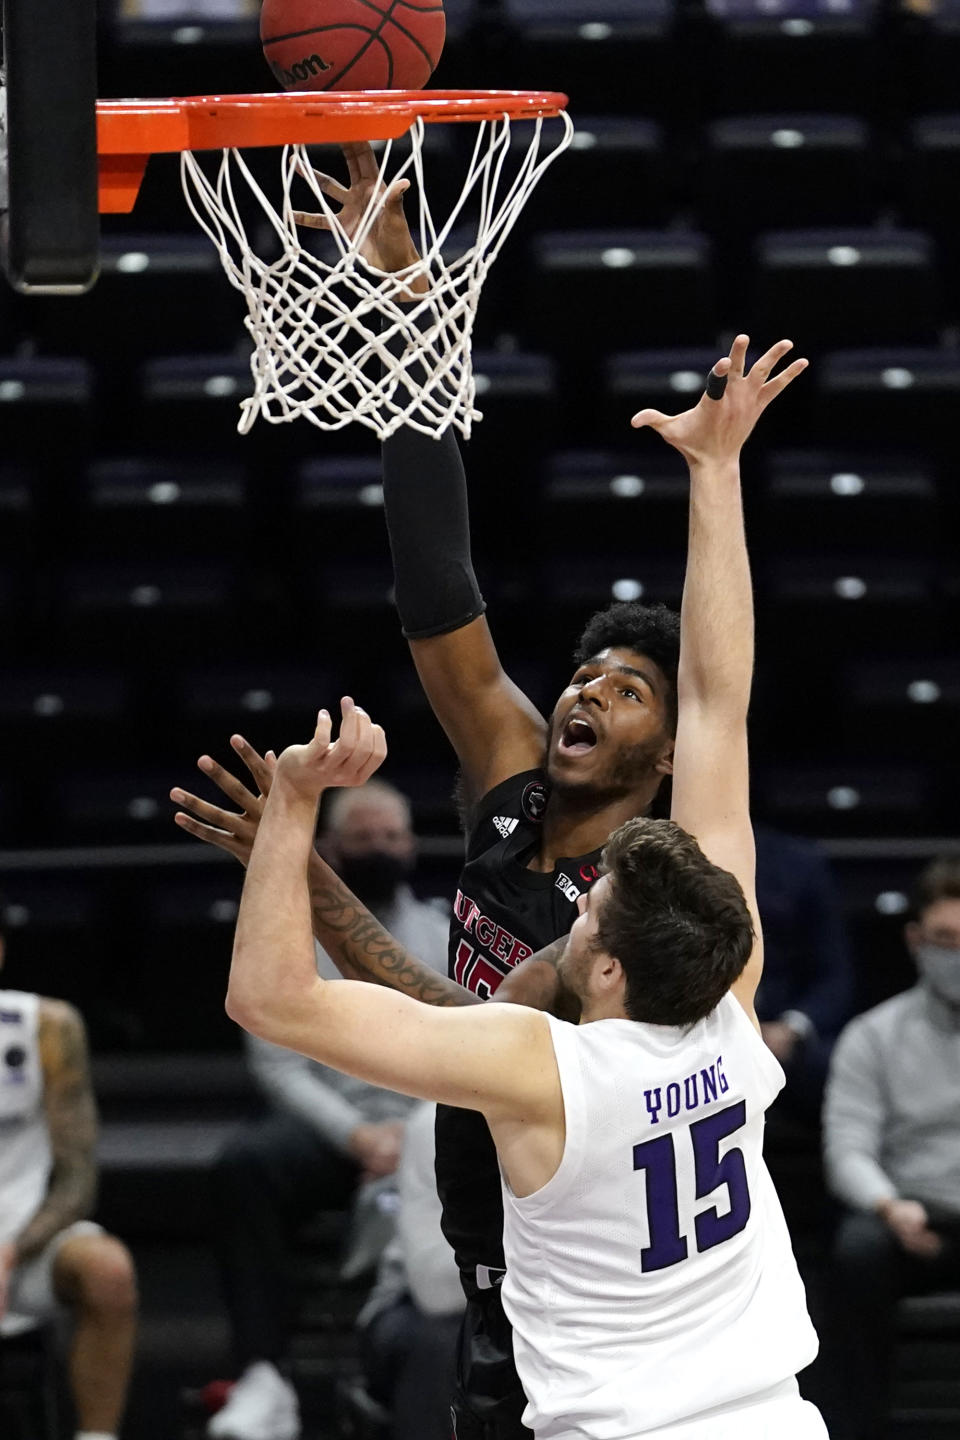 Rutgers center Myles Johnson, left, shoots against Northwestern center Ryan Young, right, during the first half of an NCAA college basketball game in Evanston, Ill., Sunday, Jan. 31, 2021. (AP Photo/Nam Y. Huh)